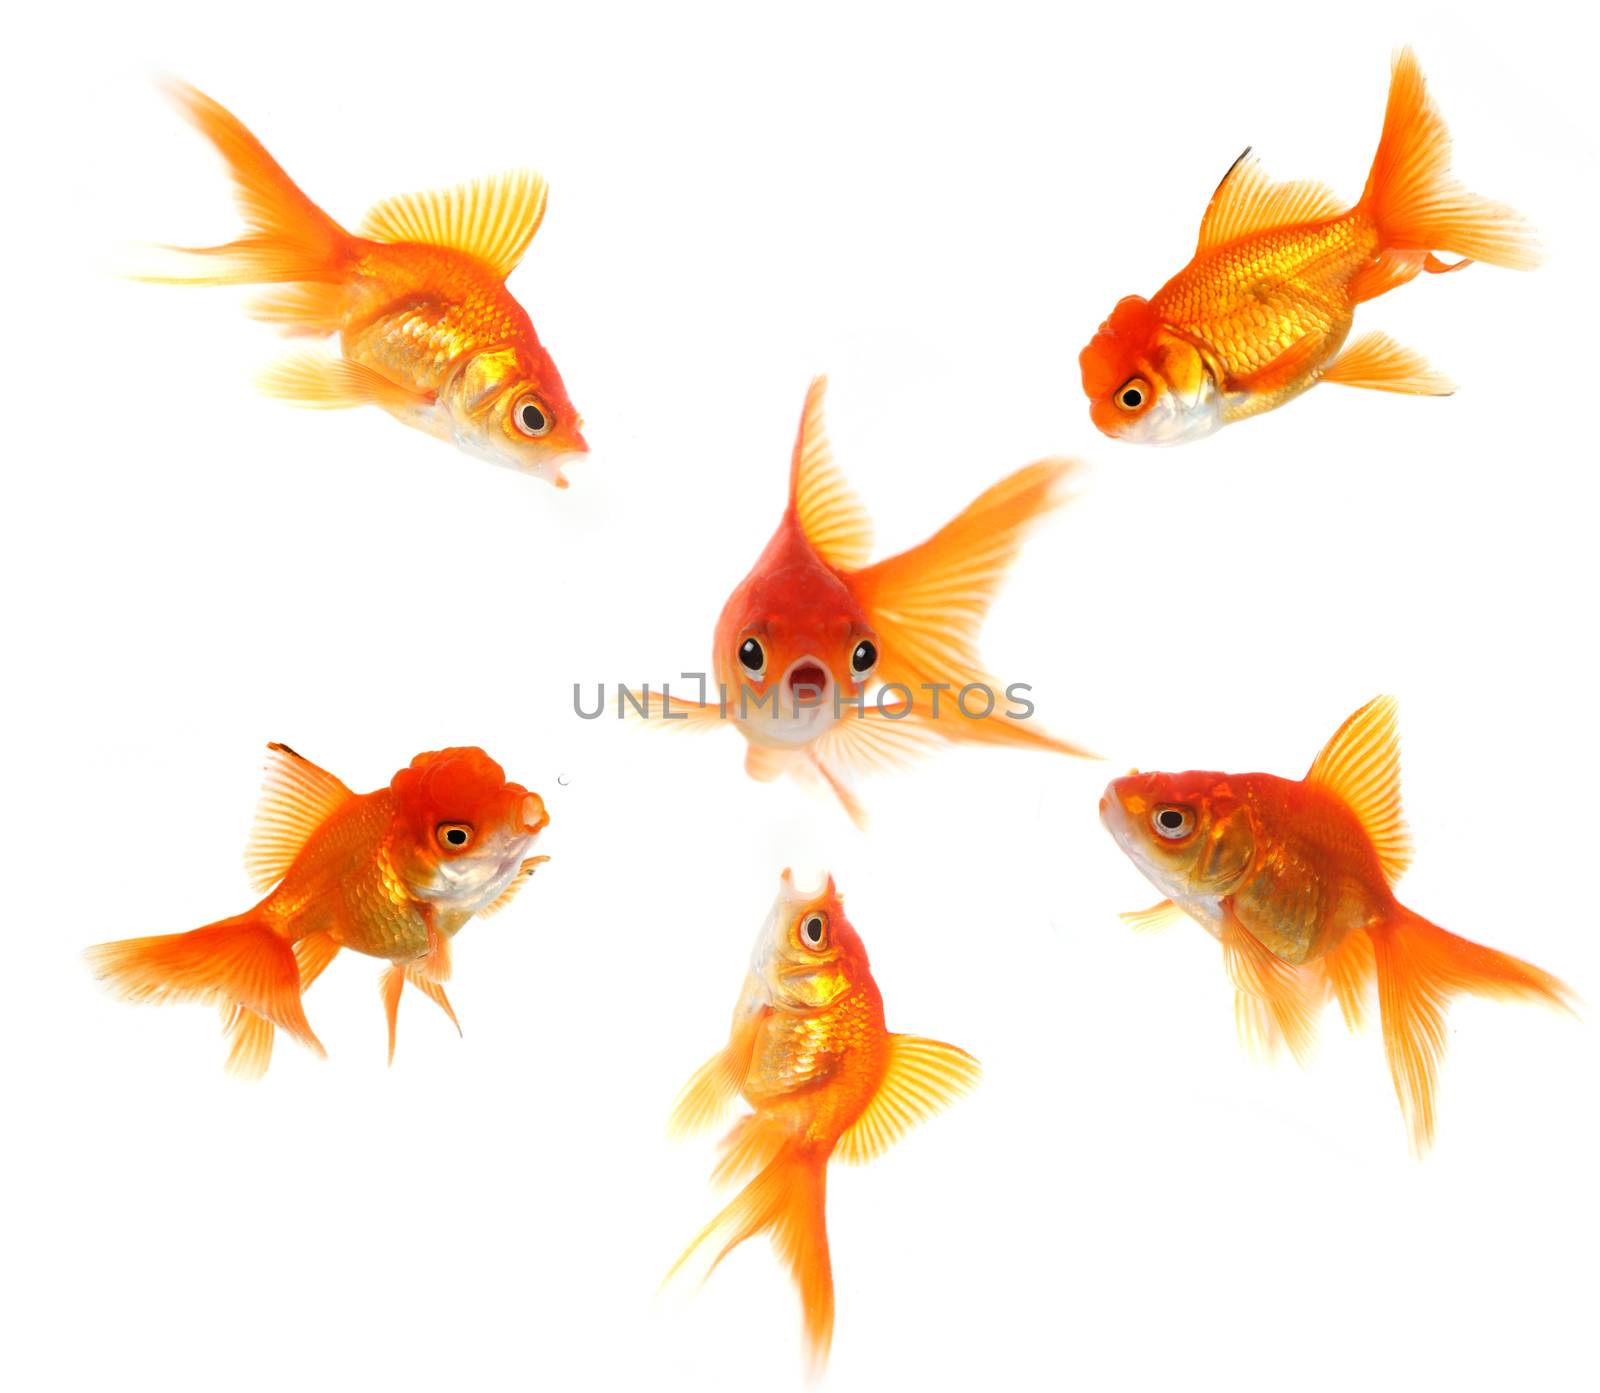 Angry Goldfish Ganging Up on a Peer. Concept Illustrates Pressure, Shock or Getting Caught